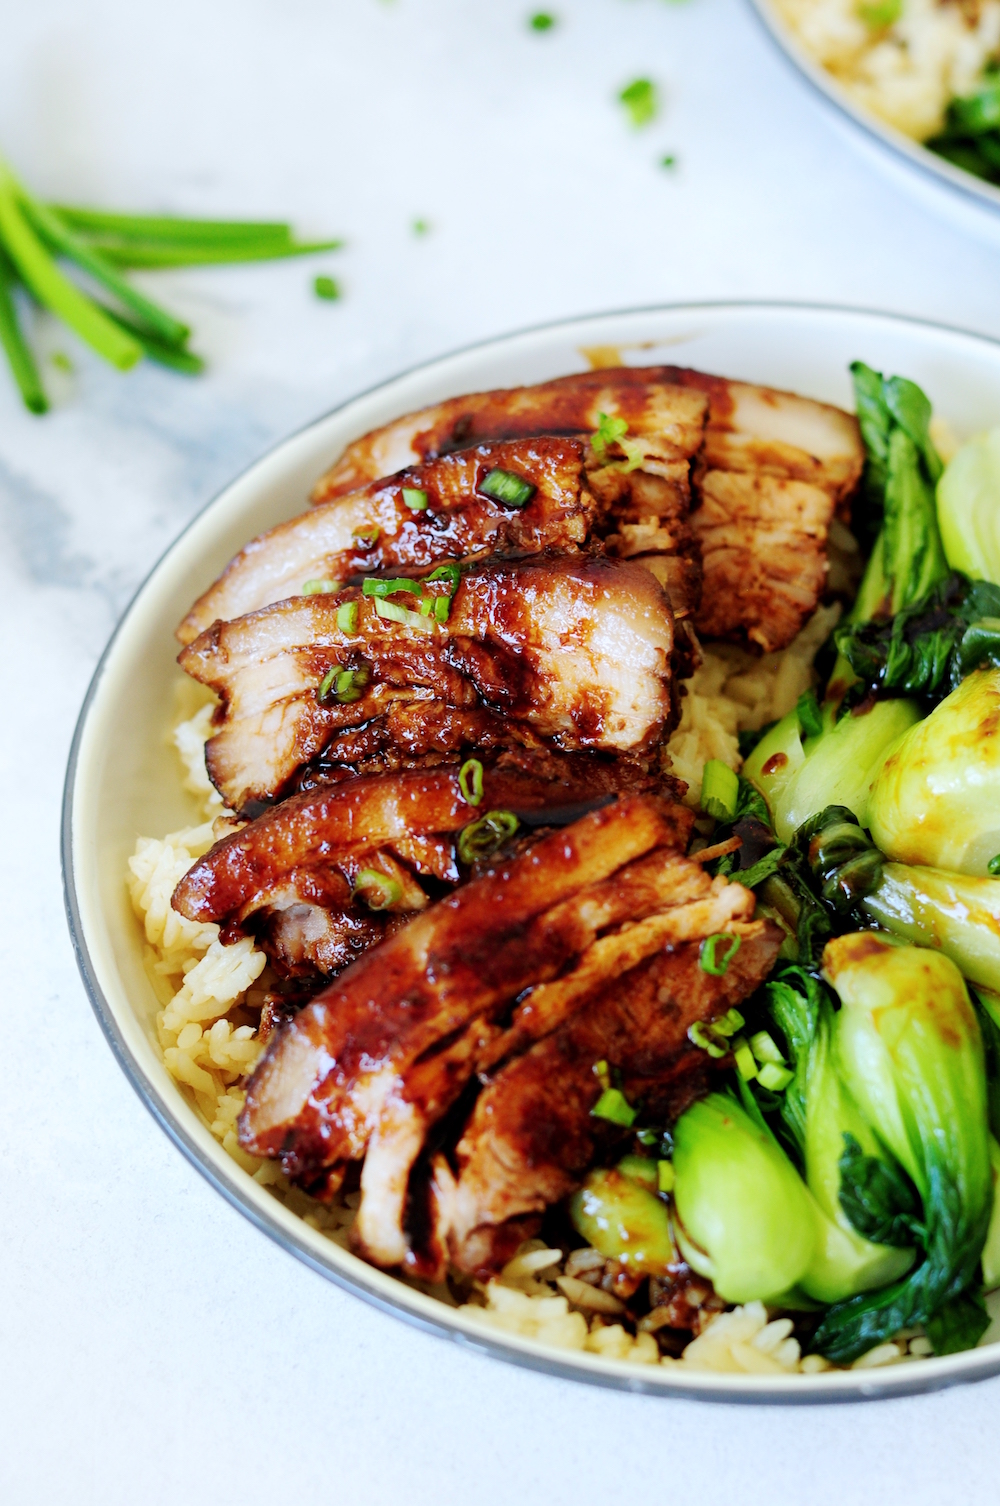 Red-Braised Sous Vide Pork Belly with Sauteed Bok Choy, a traditional classic Chinese recipe turned revolutionarily simple with the original melt-in-your-mouth texture and the authentic flavors!